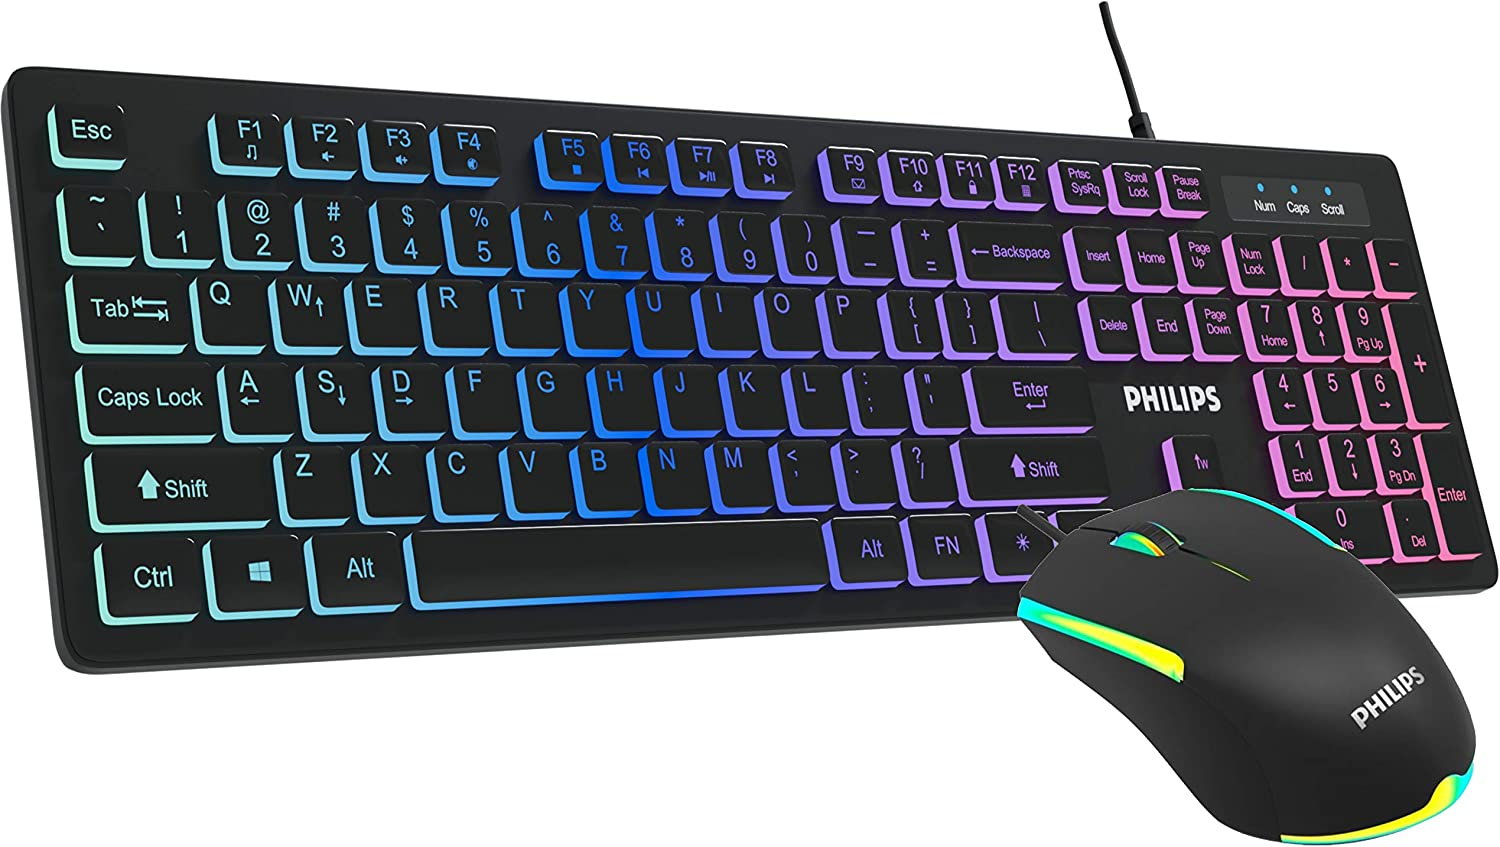 Choose a non-mechanical Chiclet keyboard with backlighting if you are going to use it in low-lit environments.